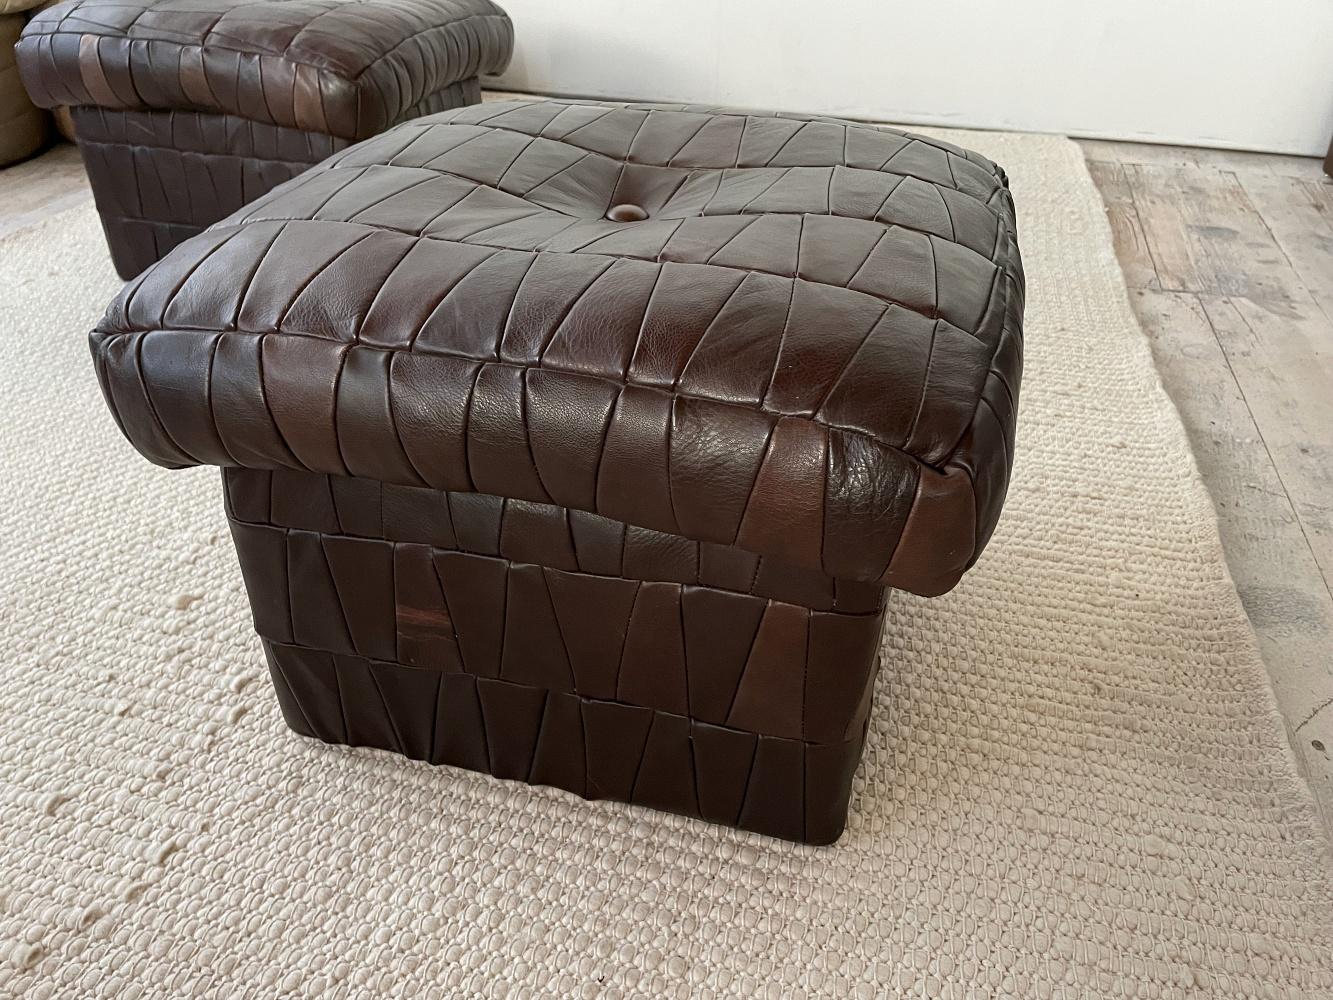 Hand-Crafted De Sede Patchwork Leather Storage Pouf, Ottoman, 1980s, DeSede Switzerland